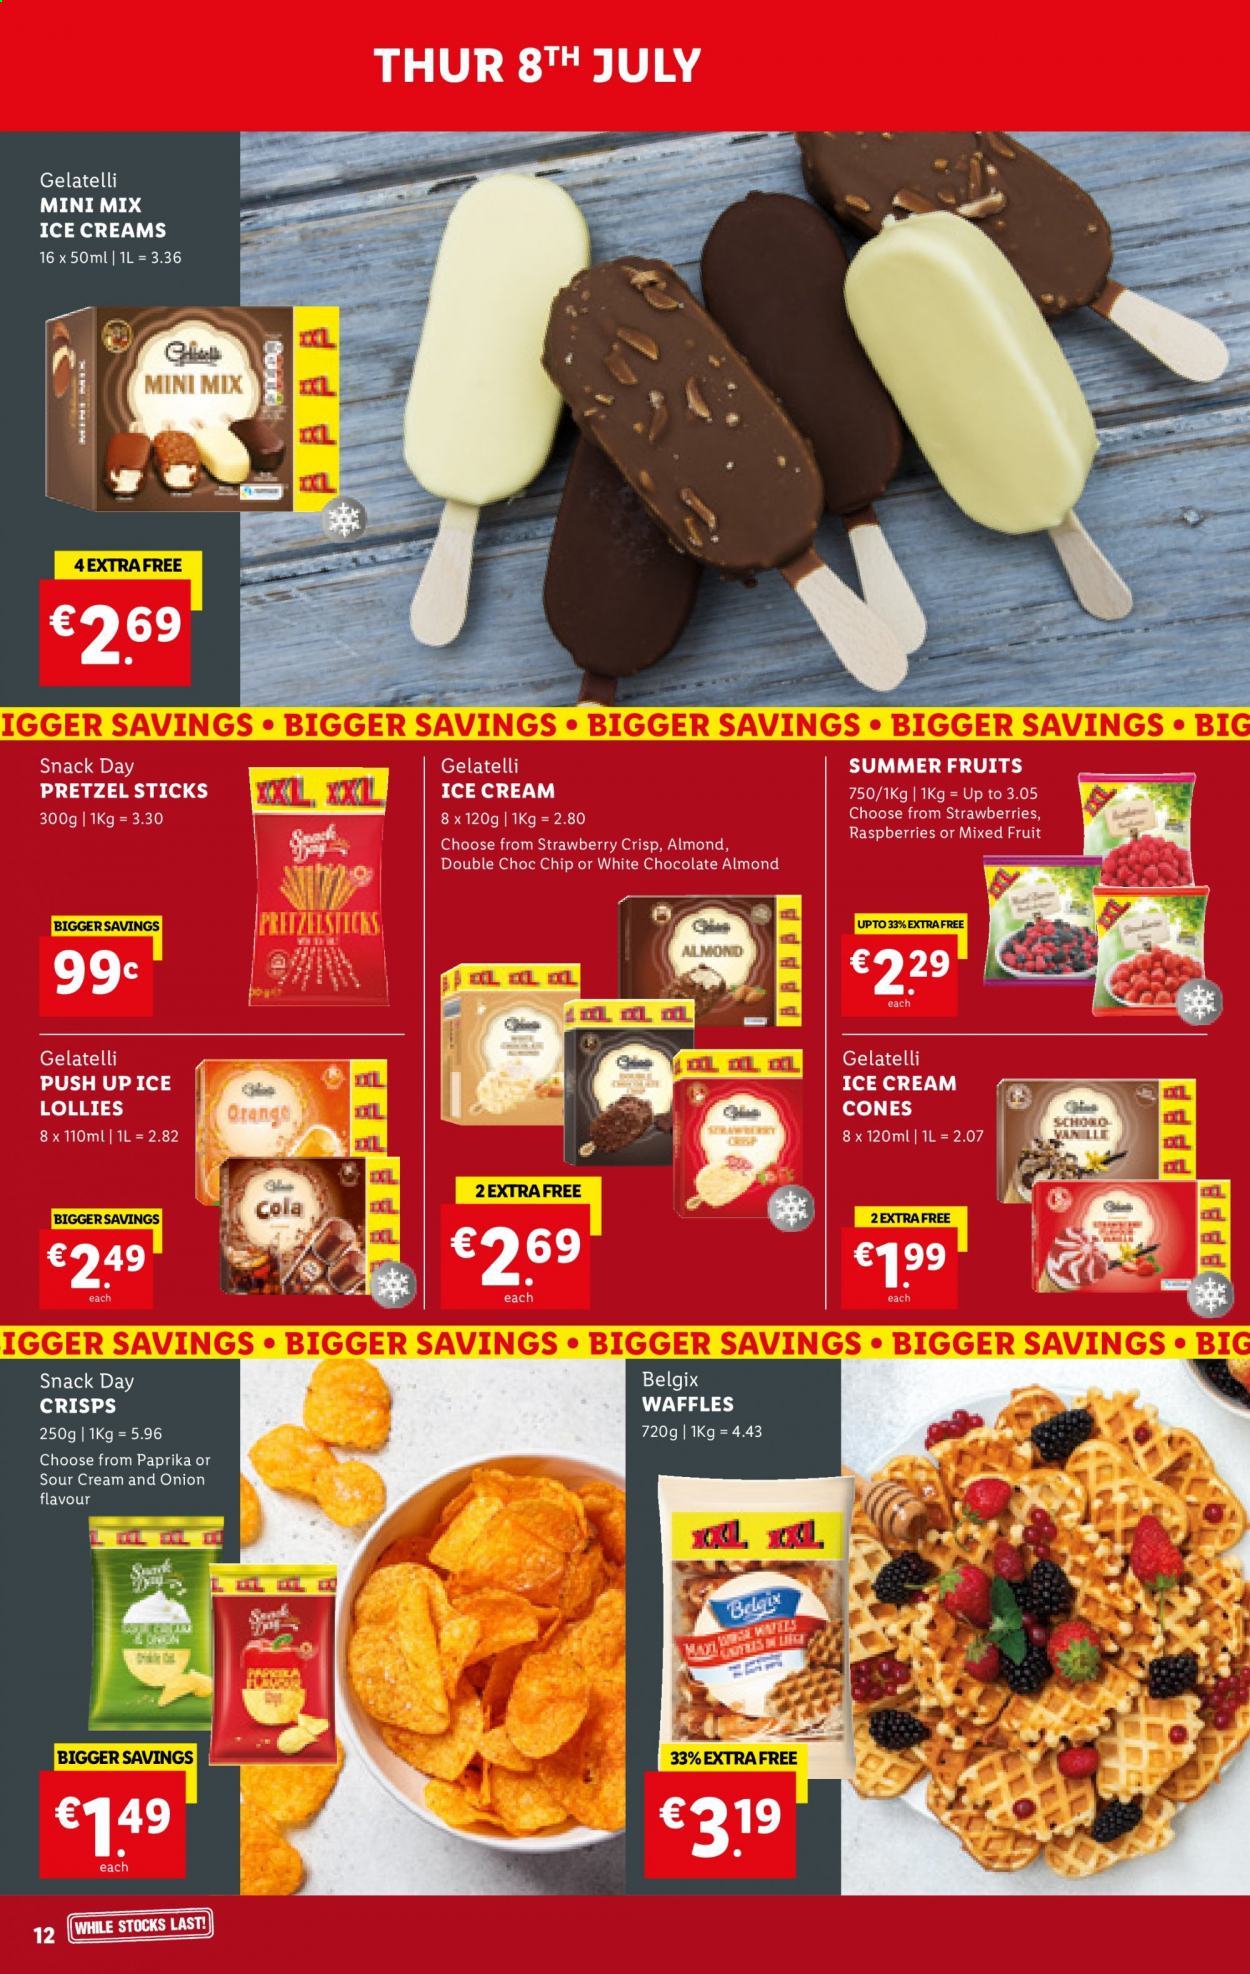 thumbnail - Lidl offer  - 08.07.2021 - 14.07.2021 - Sales products - pretzels, waffles, raspberries, strawberries, sour cream, ice cream, white chocolate, snack. Page 12.